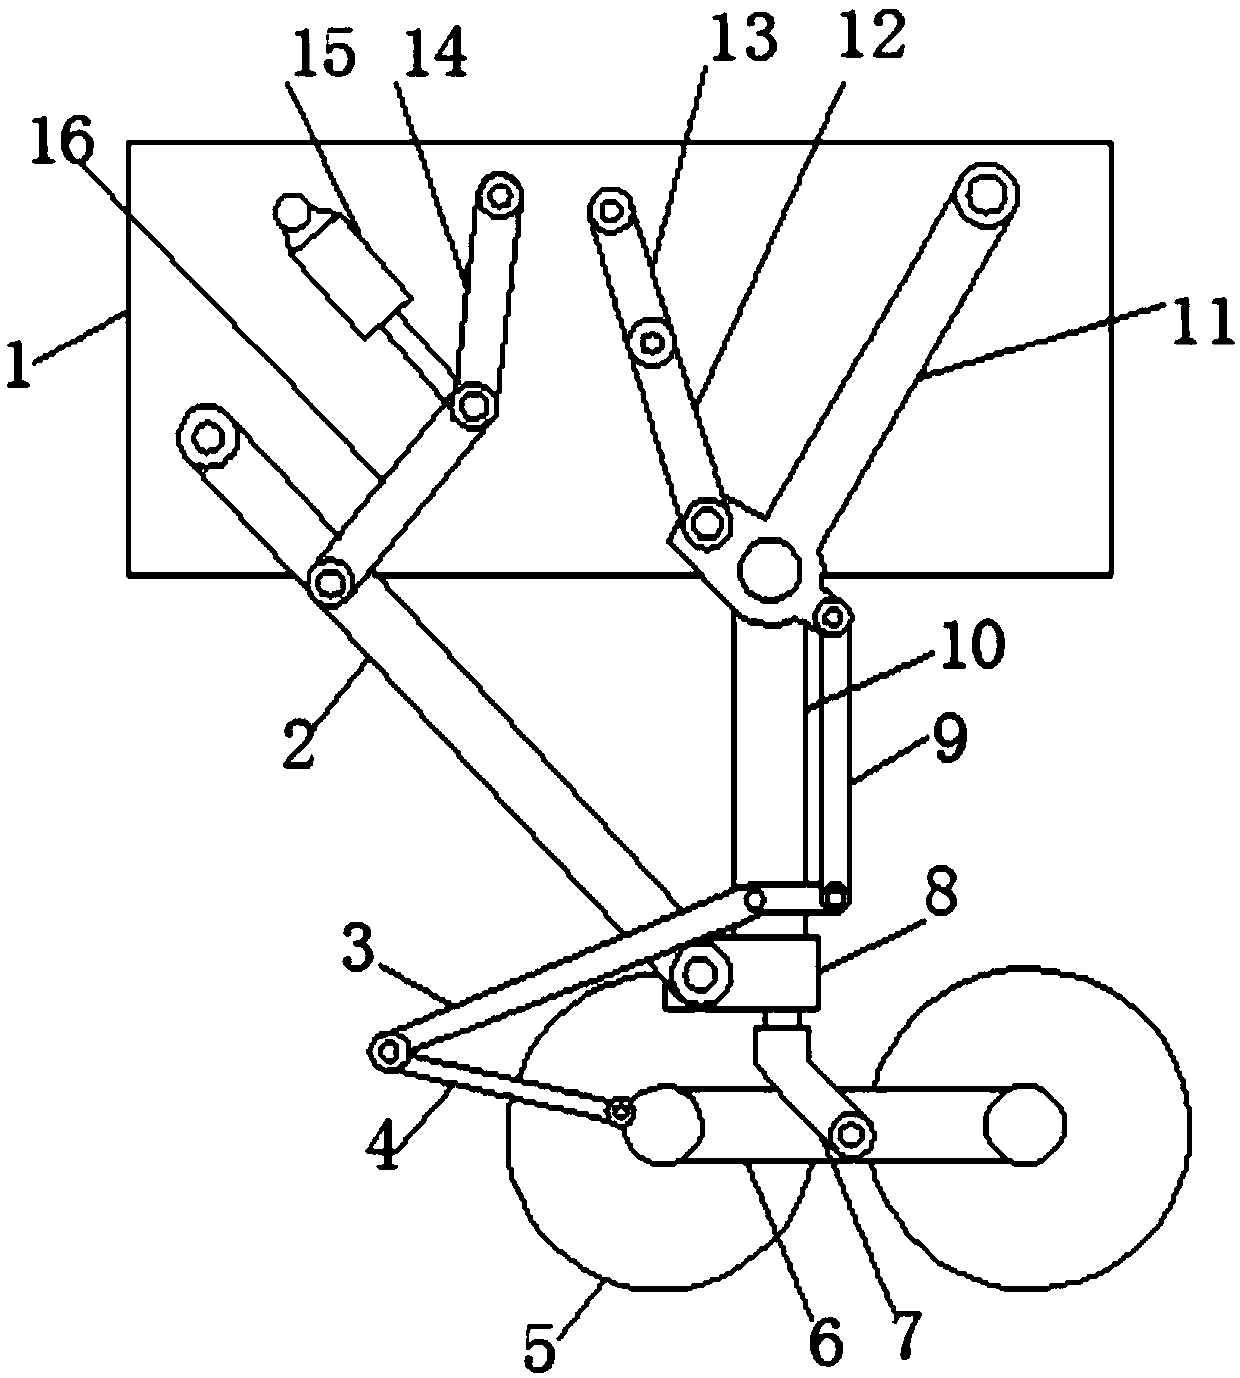 Train wheel lifting adjusting device and double-gauge train